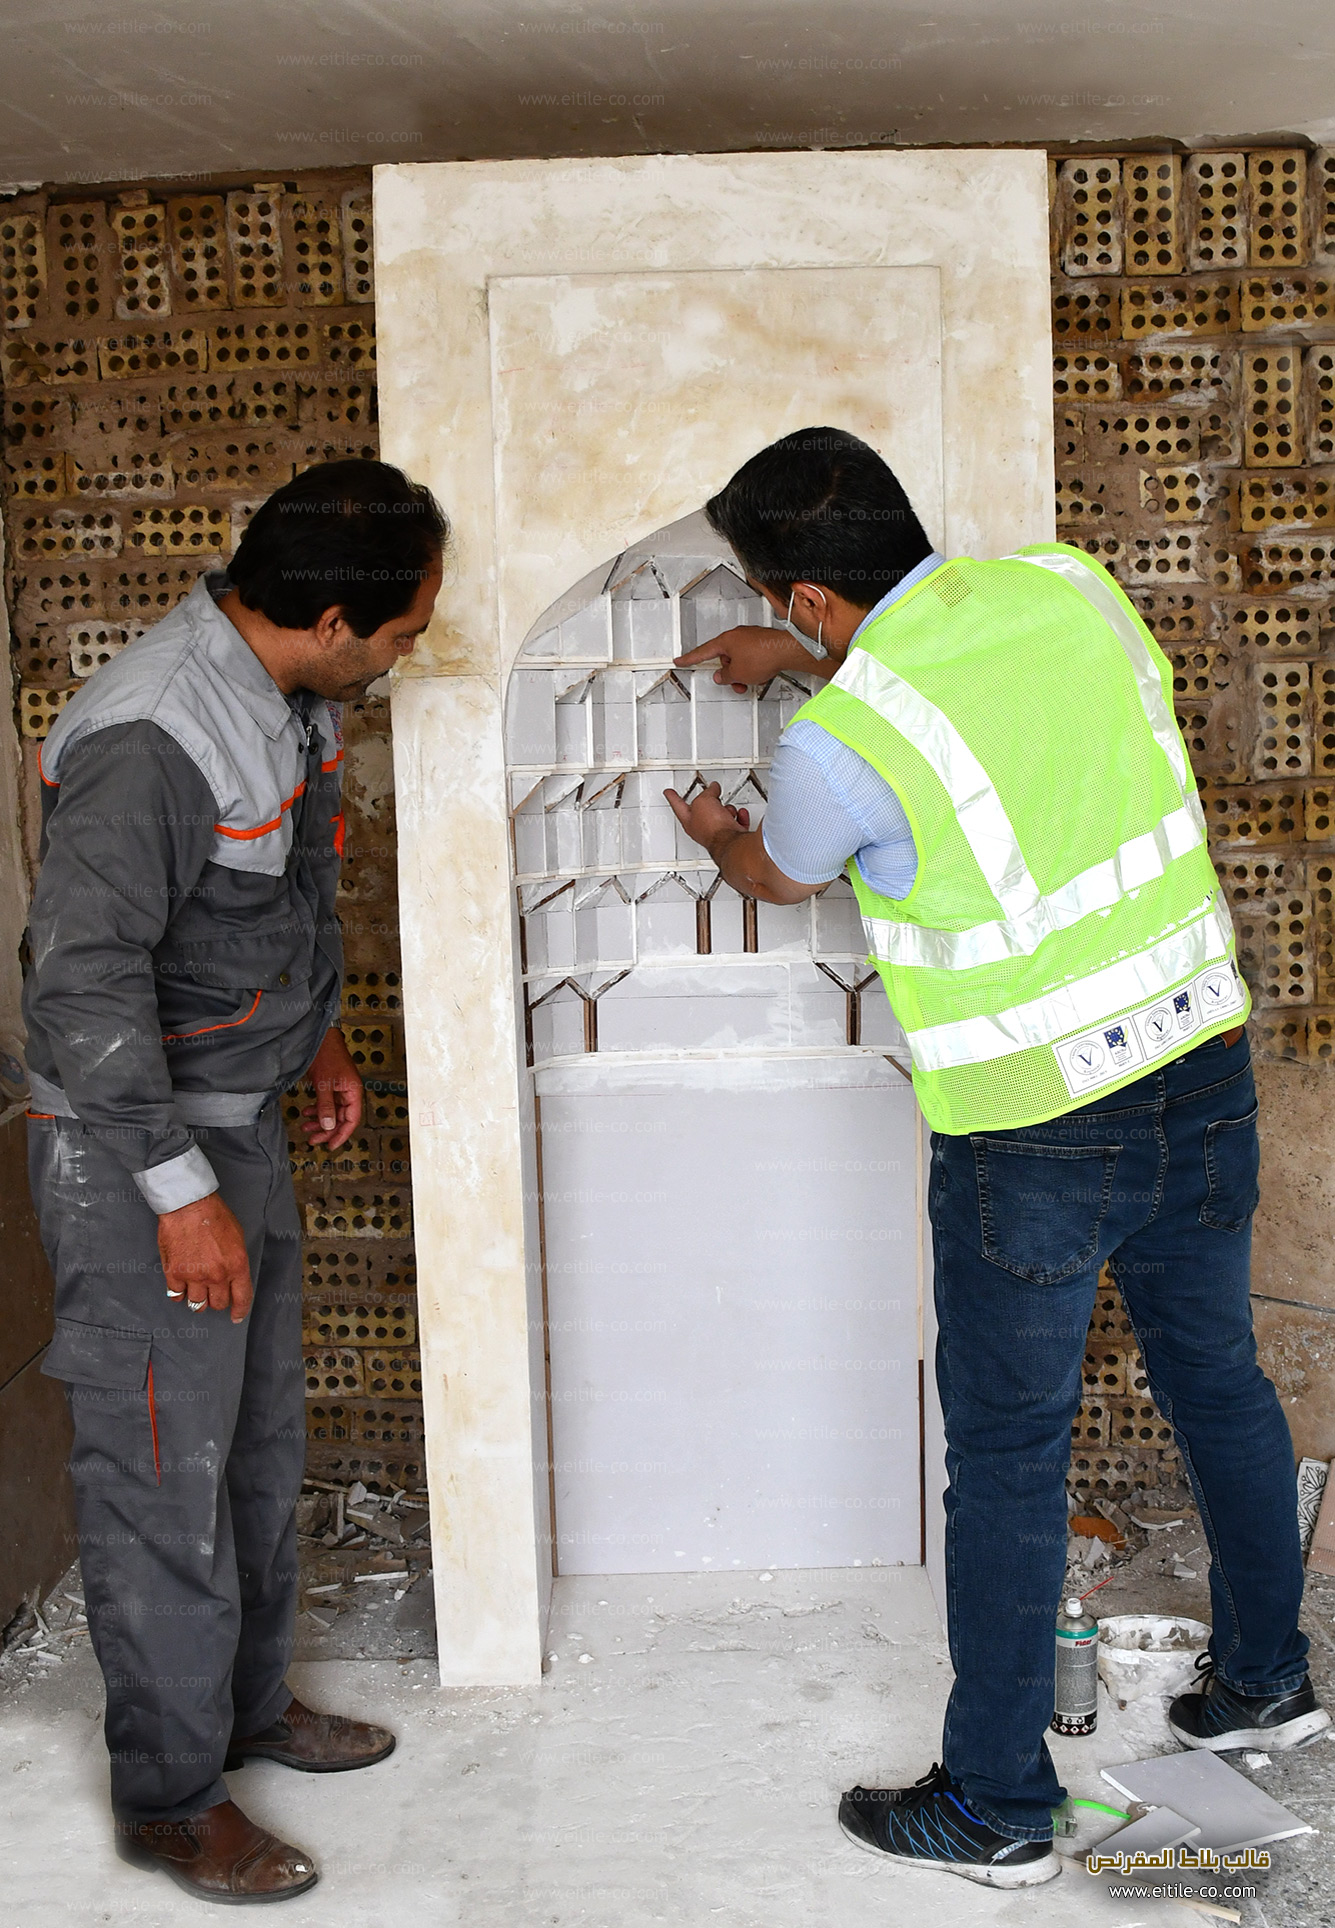 Mosque Mihrab Muqarnas tile panel designing and manufacturing, www.eitile-co.com